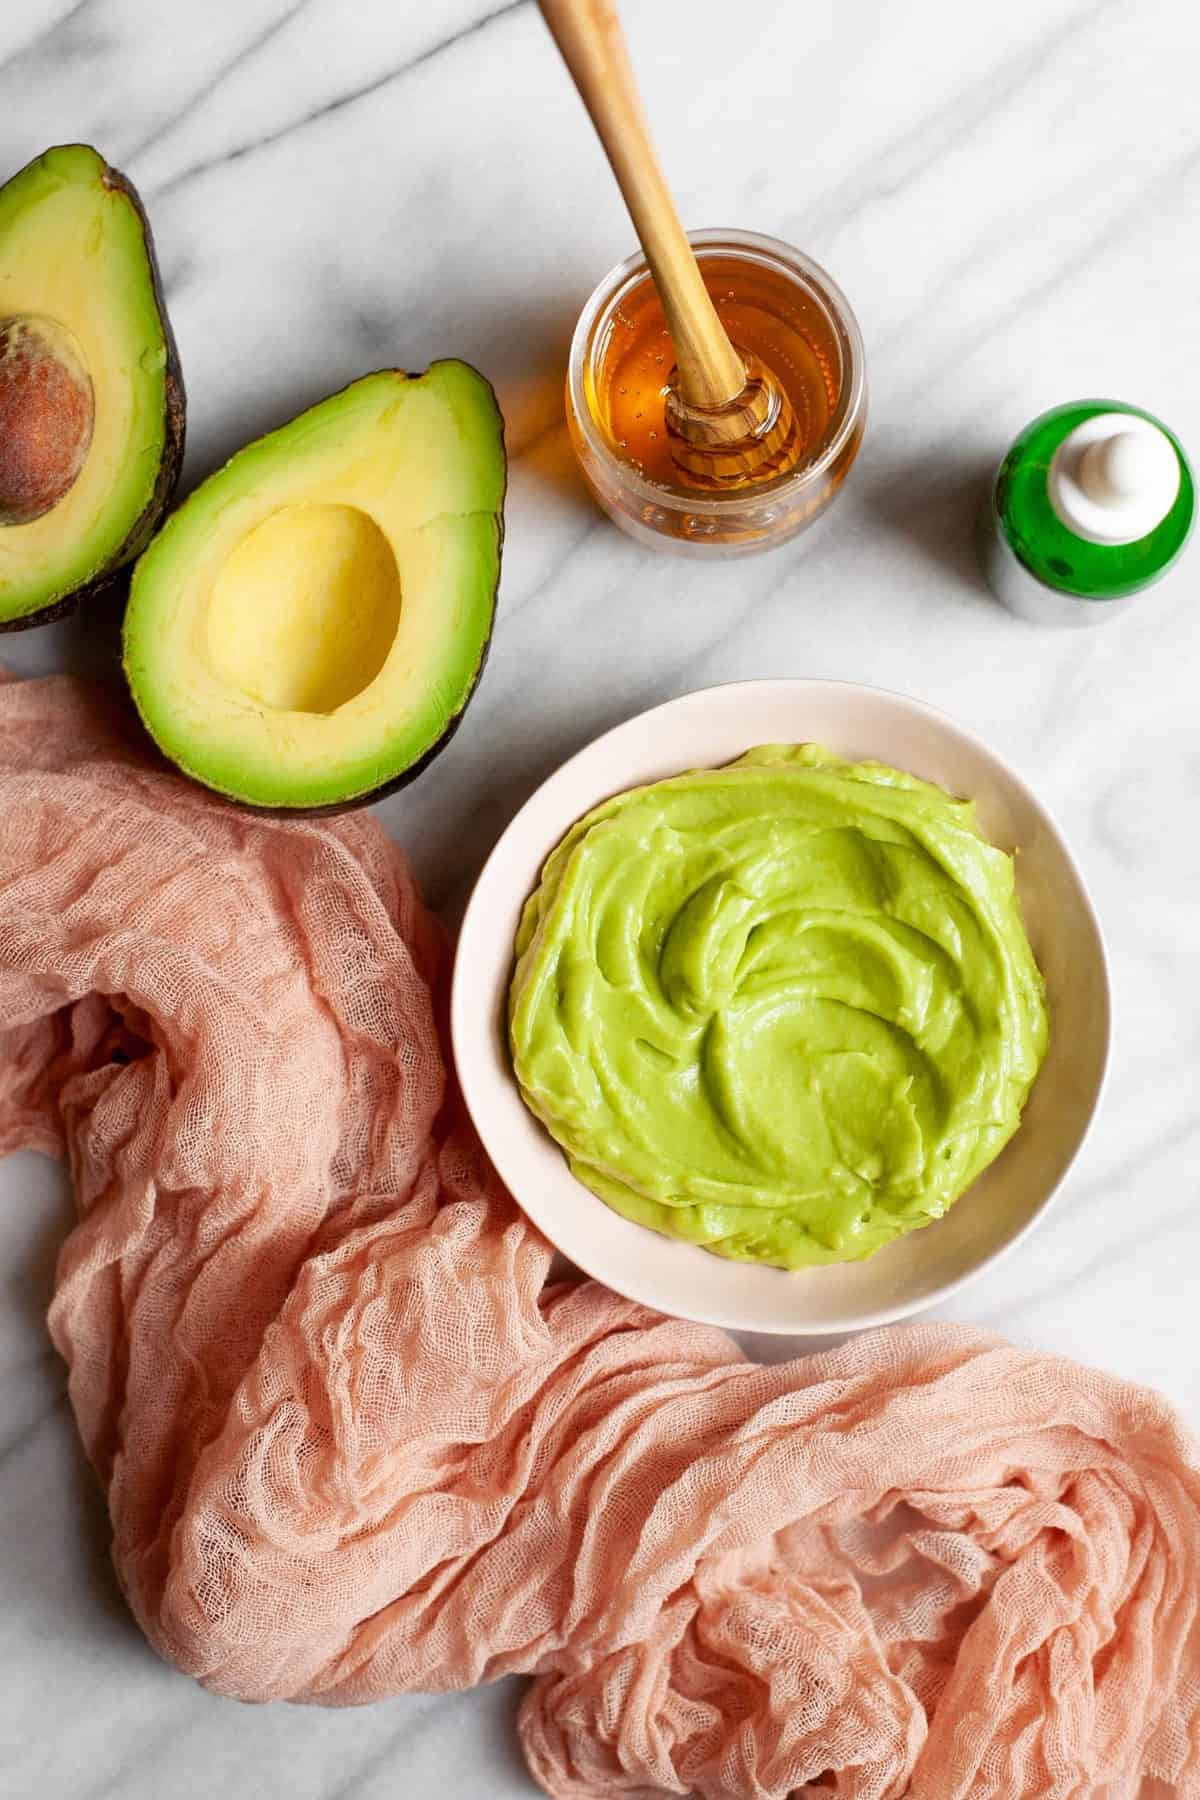 DIY Honey Hair Mask
 Whipped Avocado Honey and Olive Oil Deep Conditioning